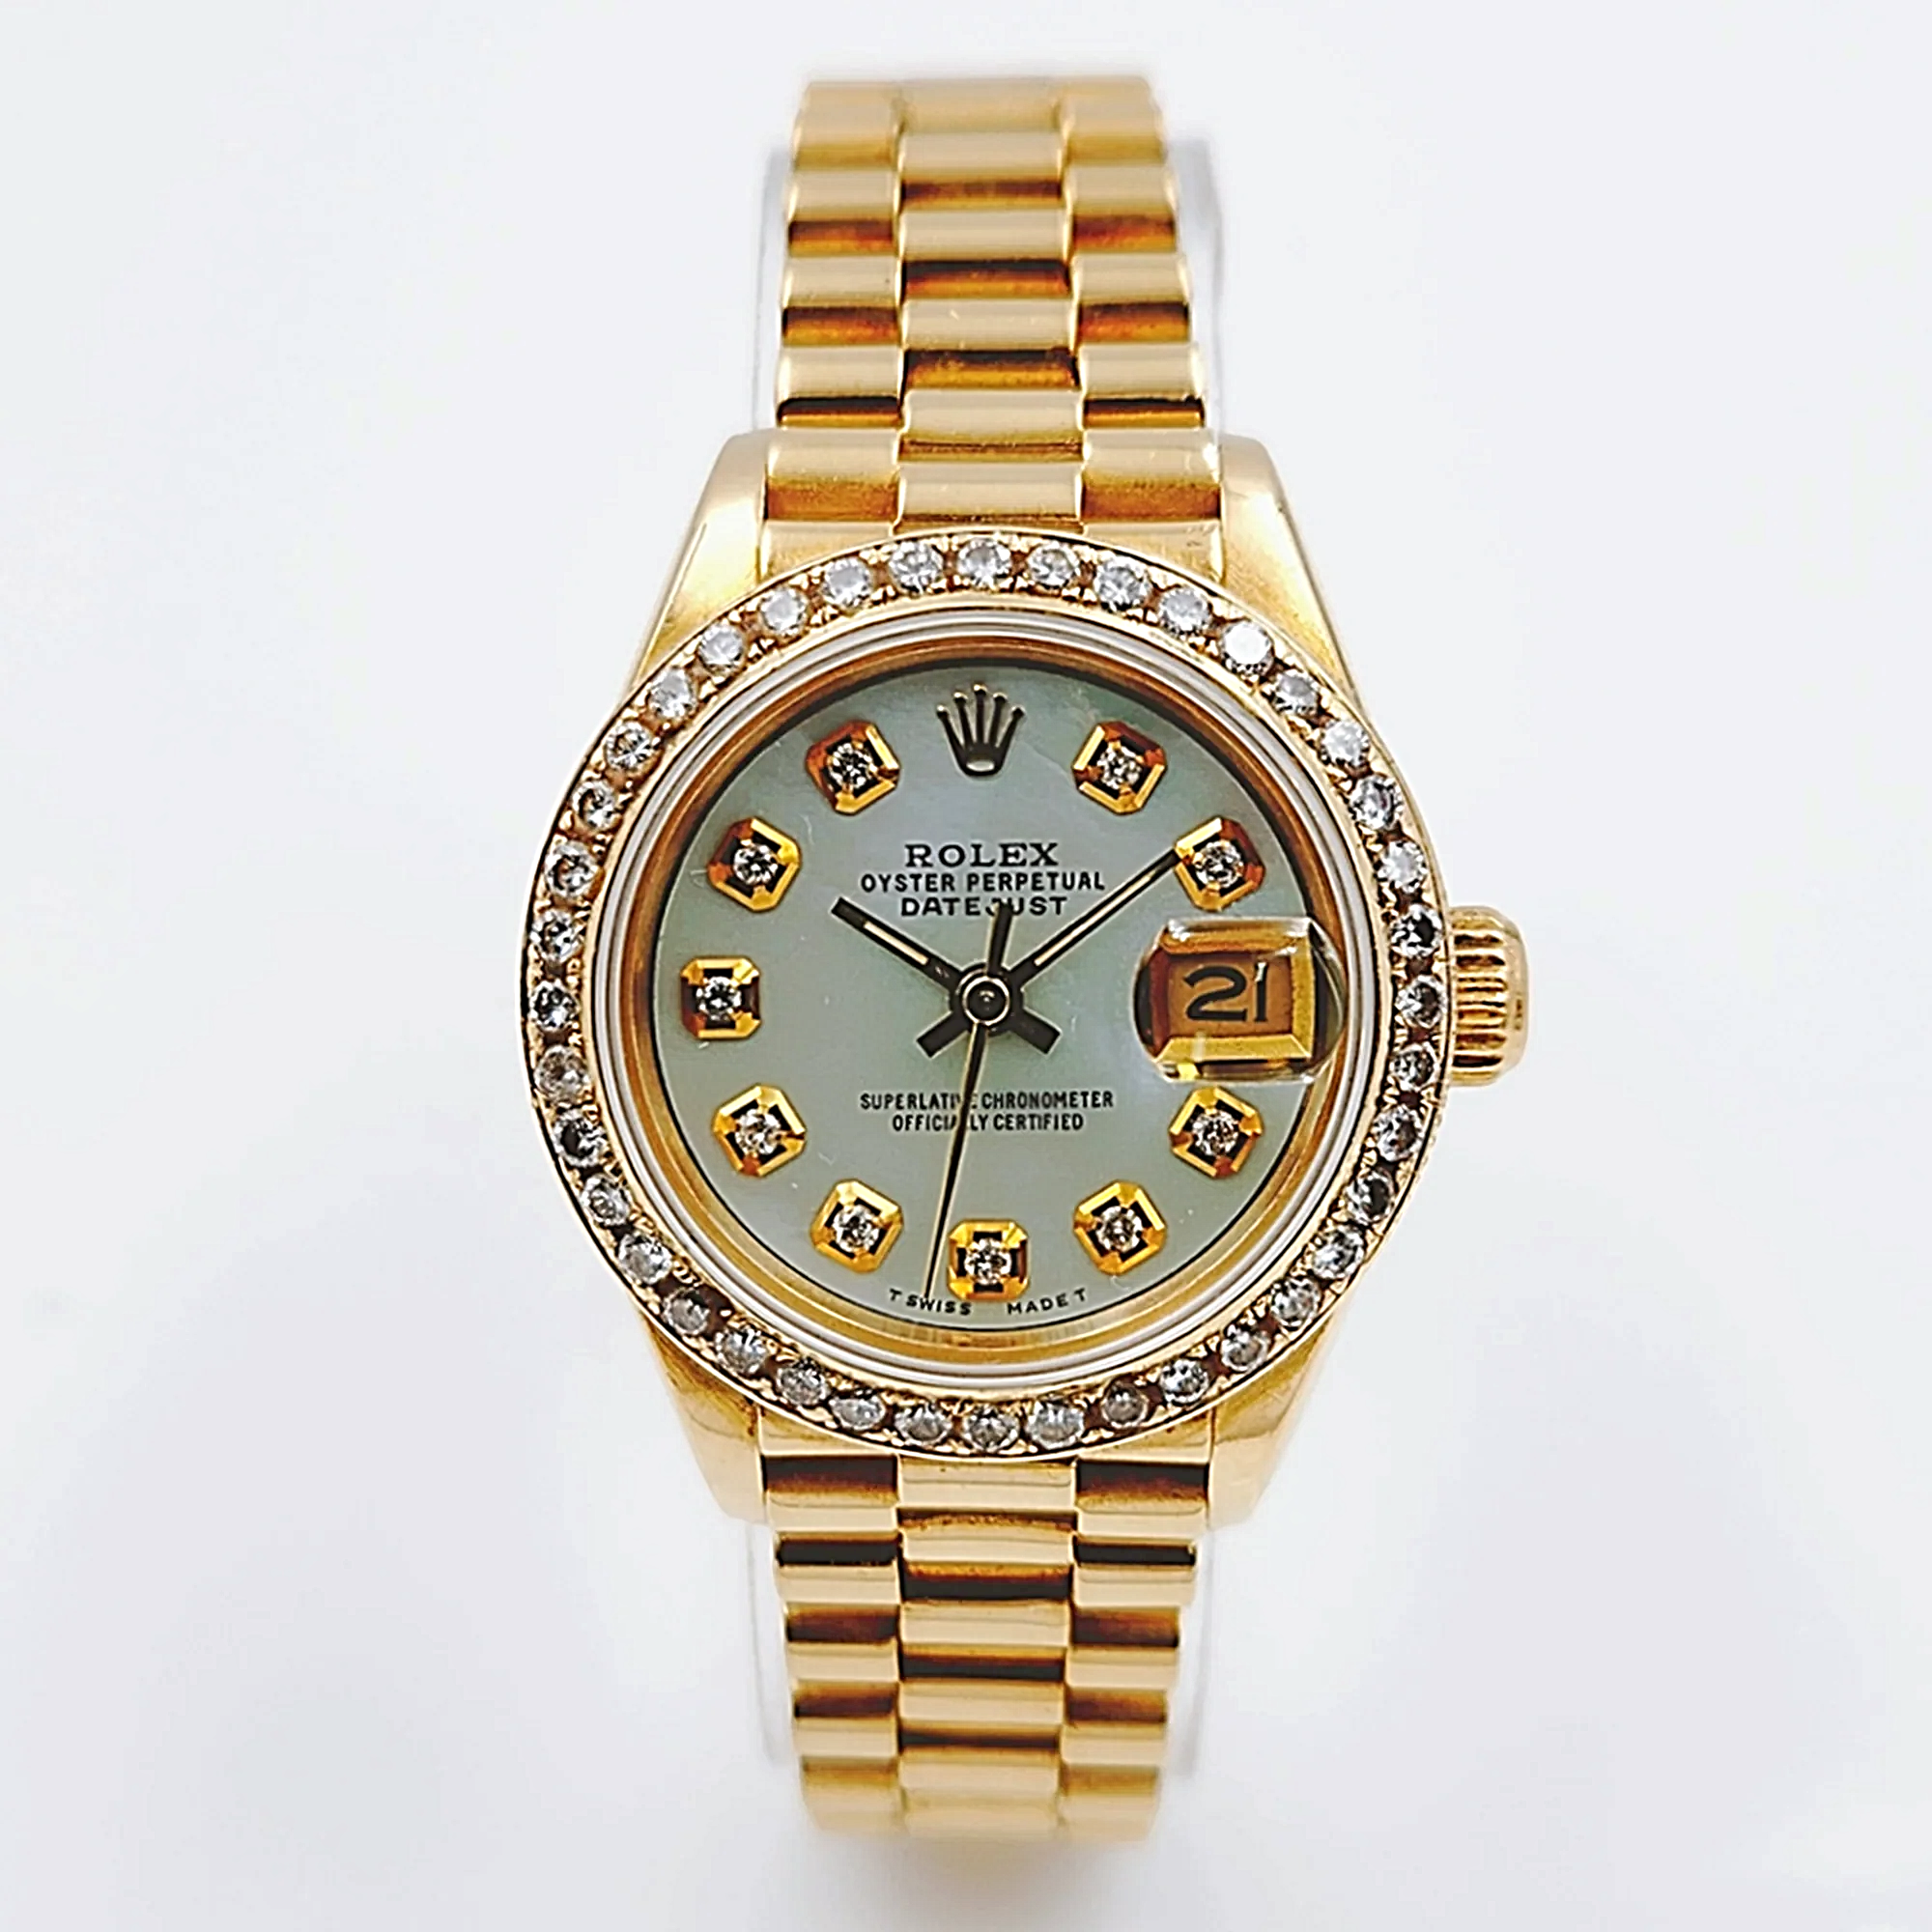 Ladies Rolex 26mm Presidential 18K Solid Yellow Gold Watch with Mother of Pearl Diamond Dial and Diamond Bezel. (Pre-Owned 69178)